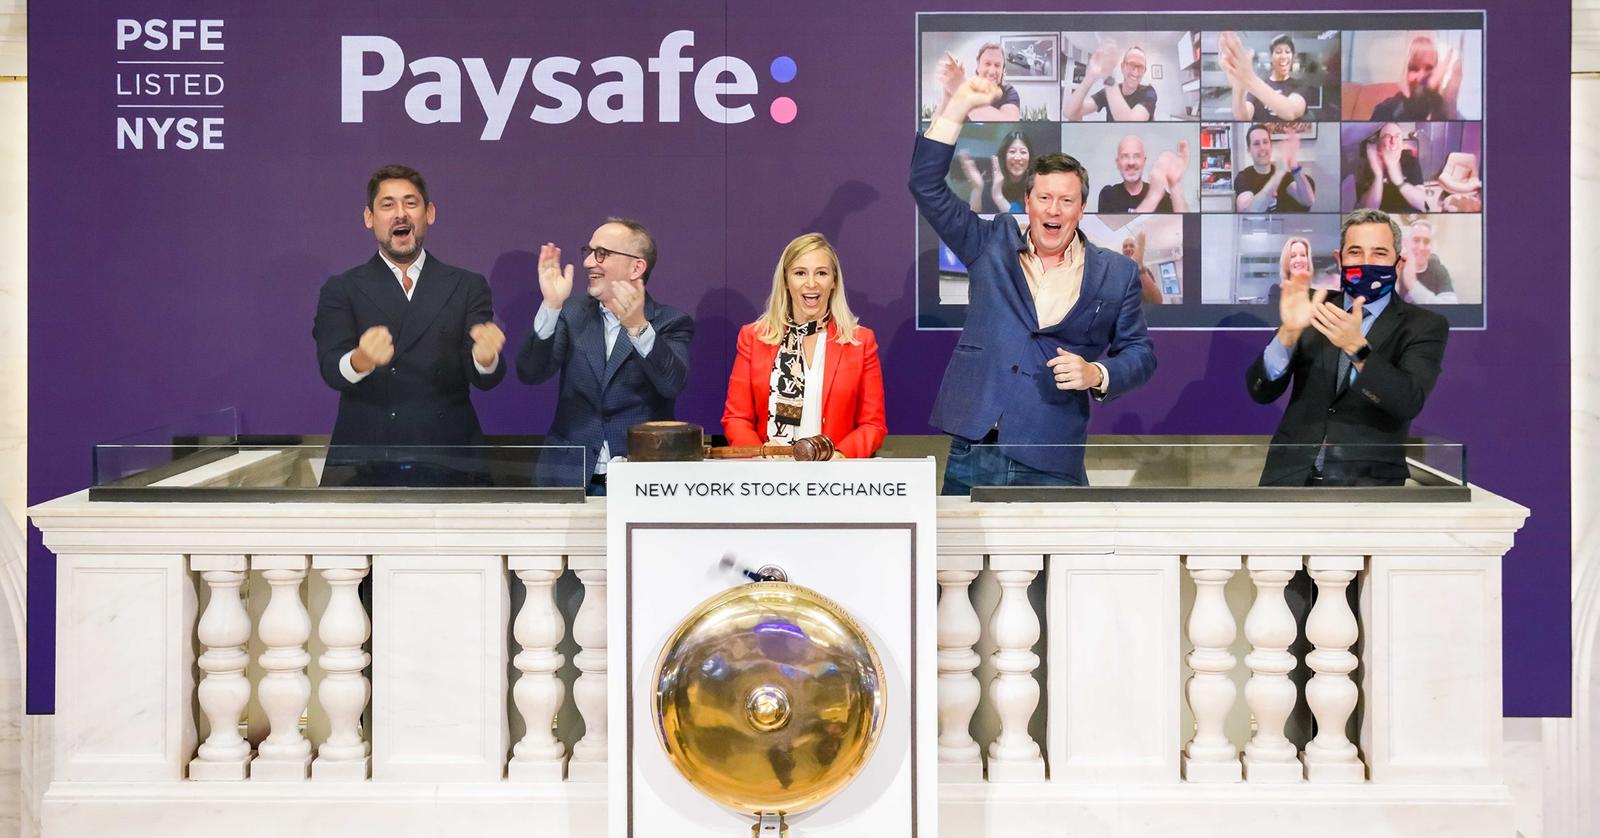 What's Paysafe's (PSFE) Stock Forecast in 2021?